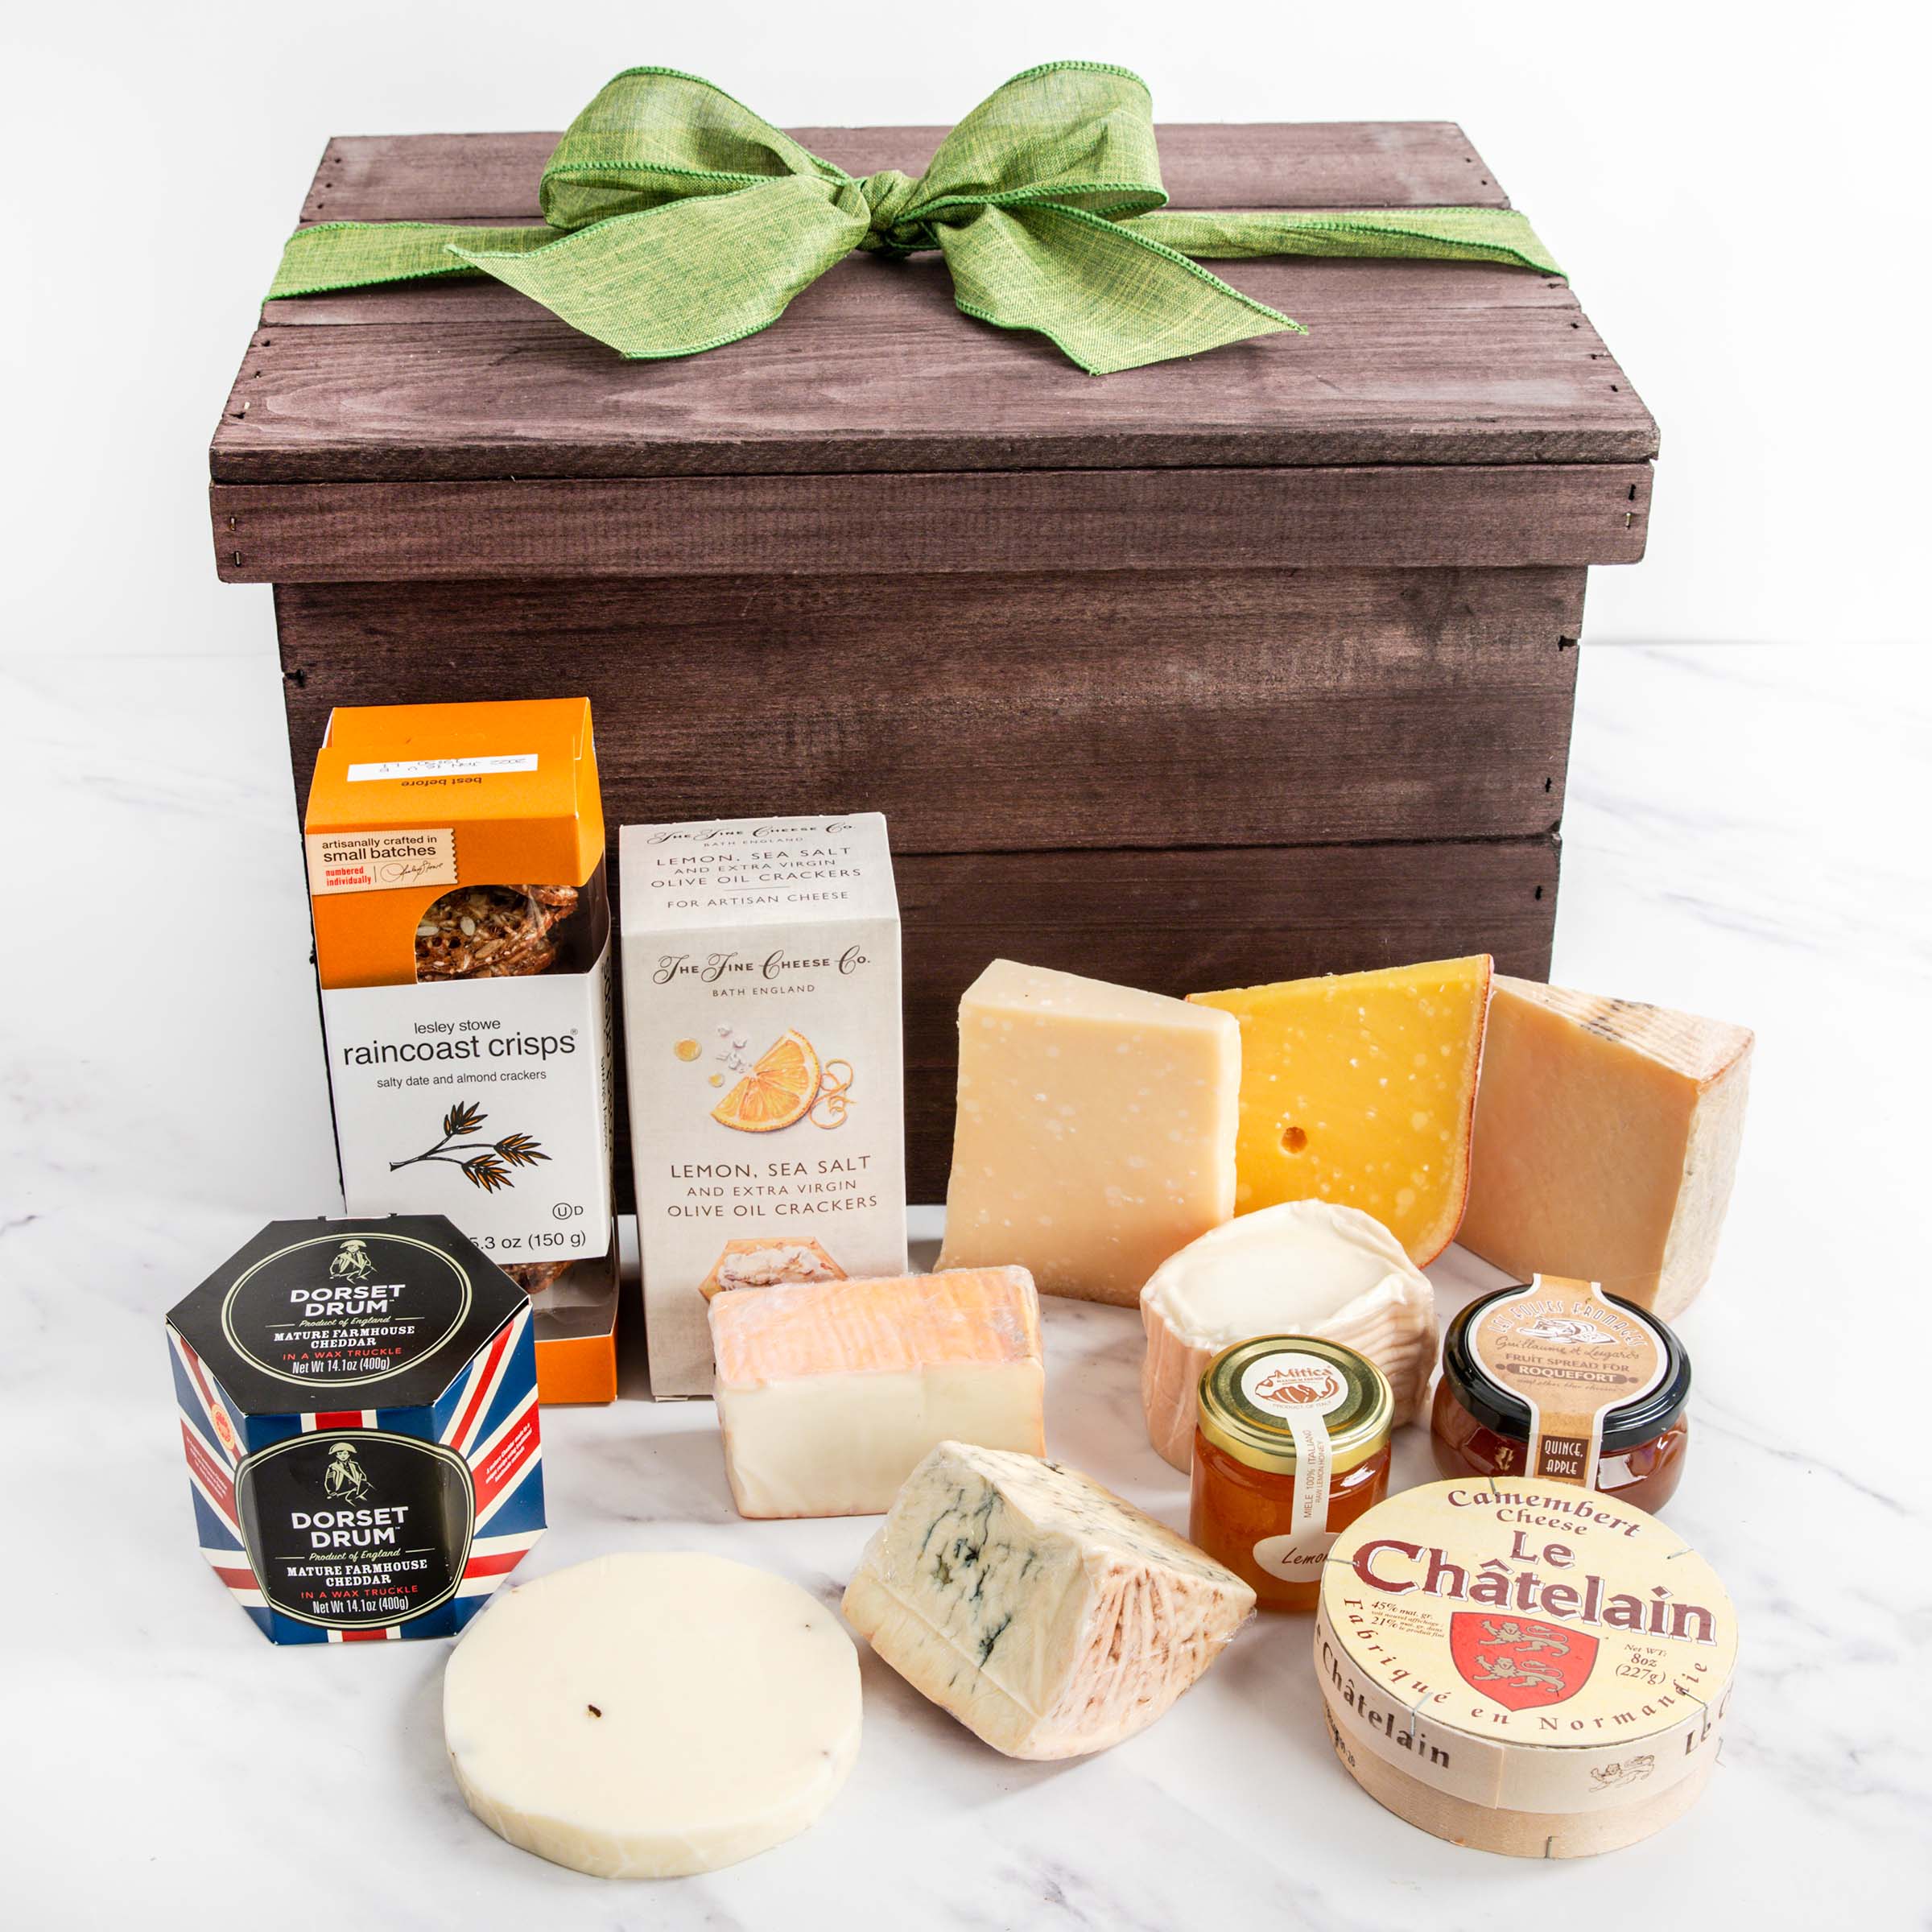 Discovering Greece in a Wooden Gift Box, Luxury Food Hampers & Gift Boxes